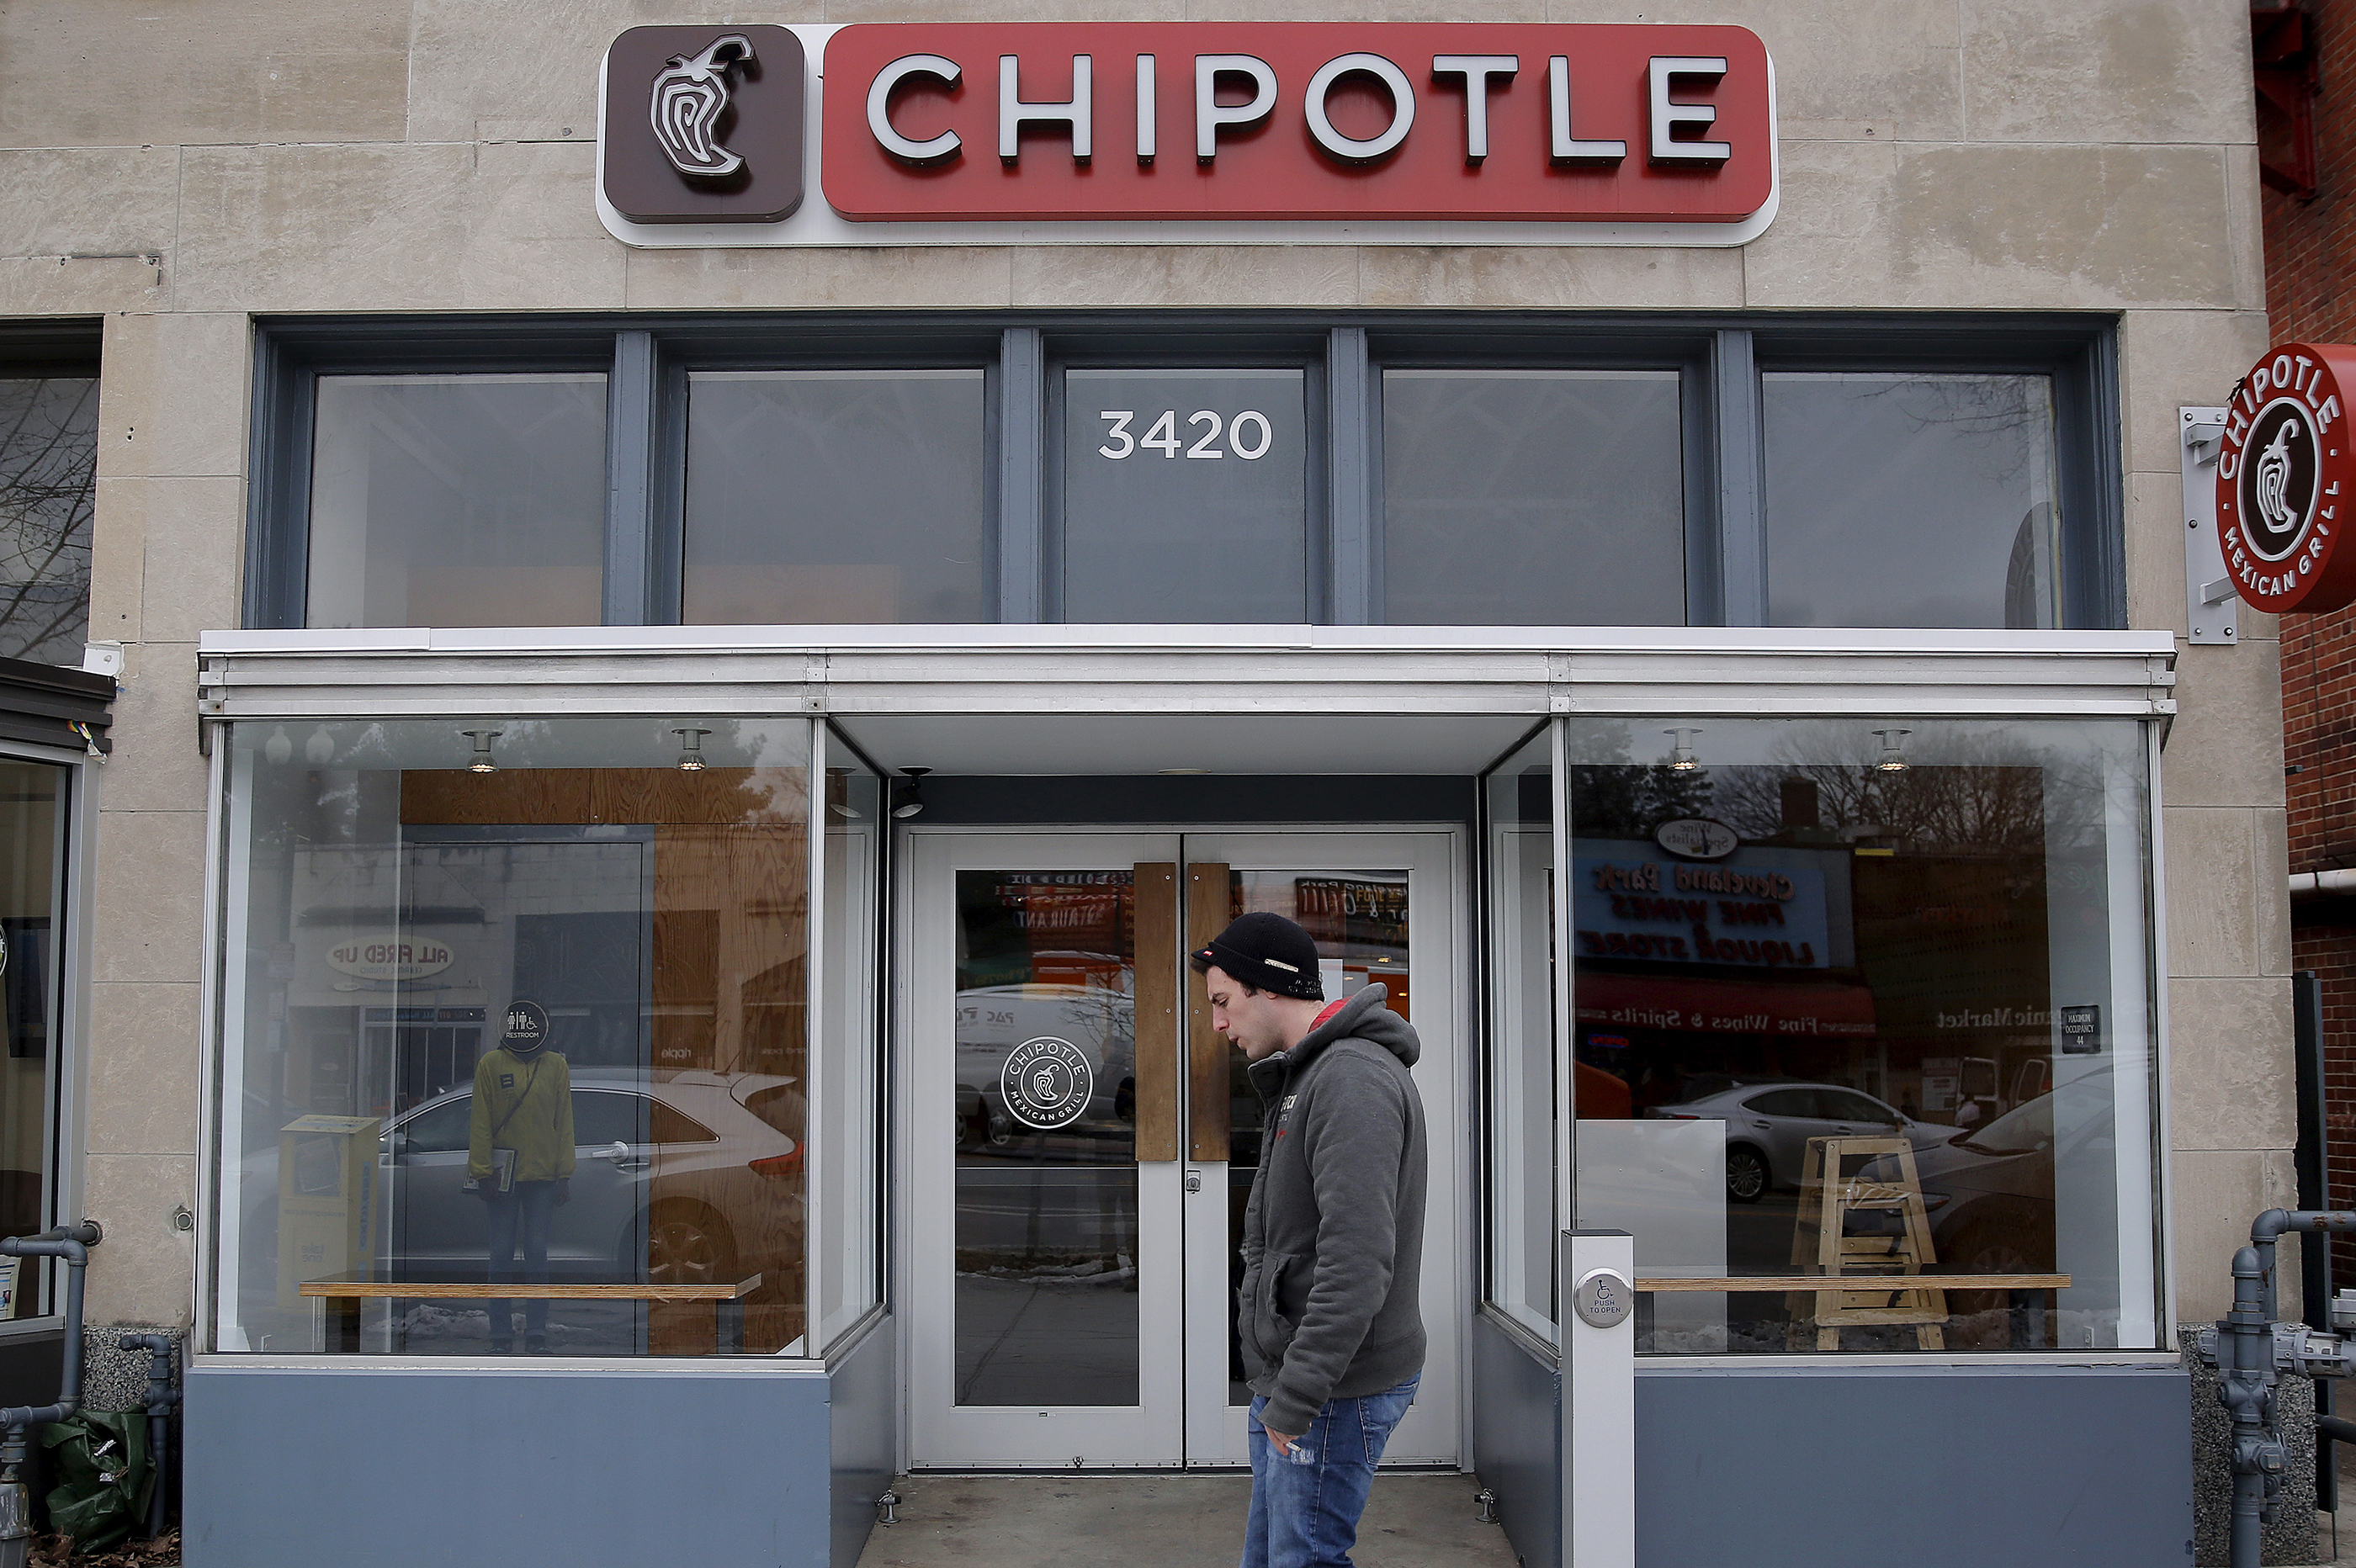 People Are Still Avoiding Chipotle. Here's Why